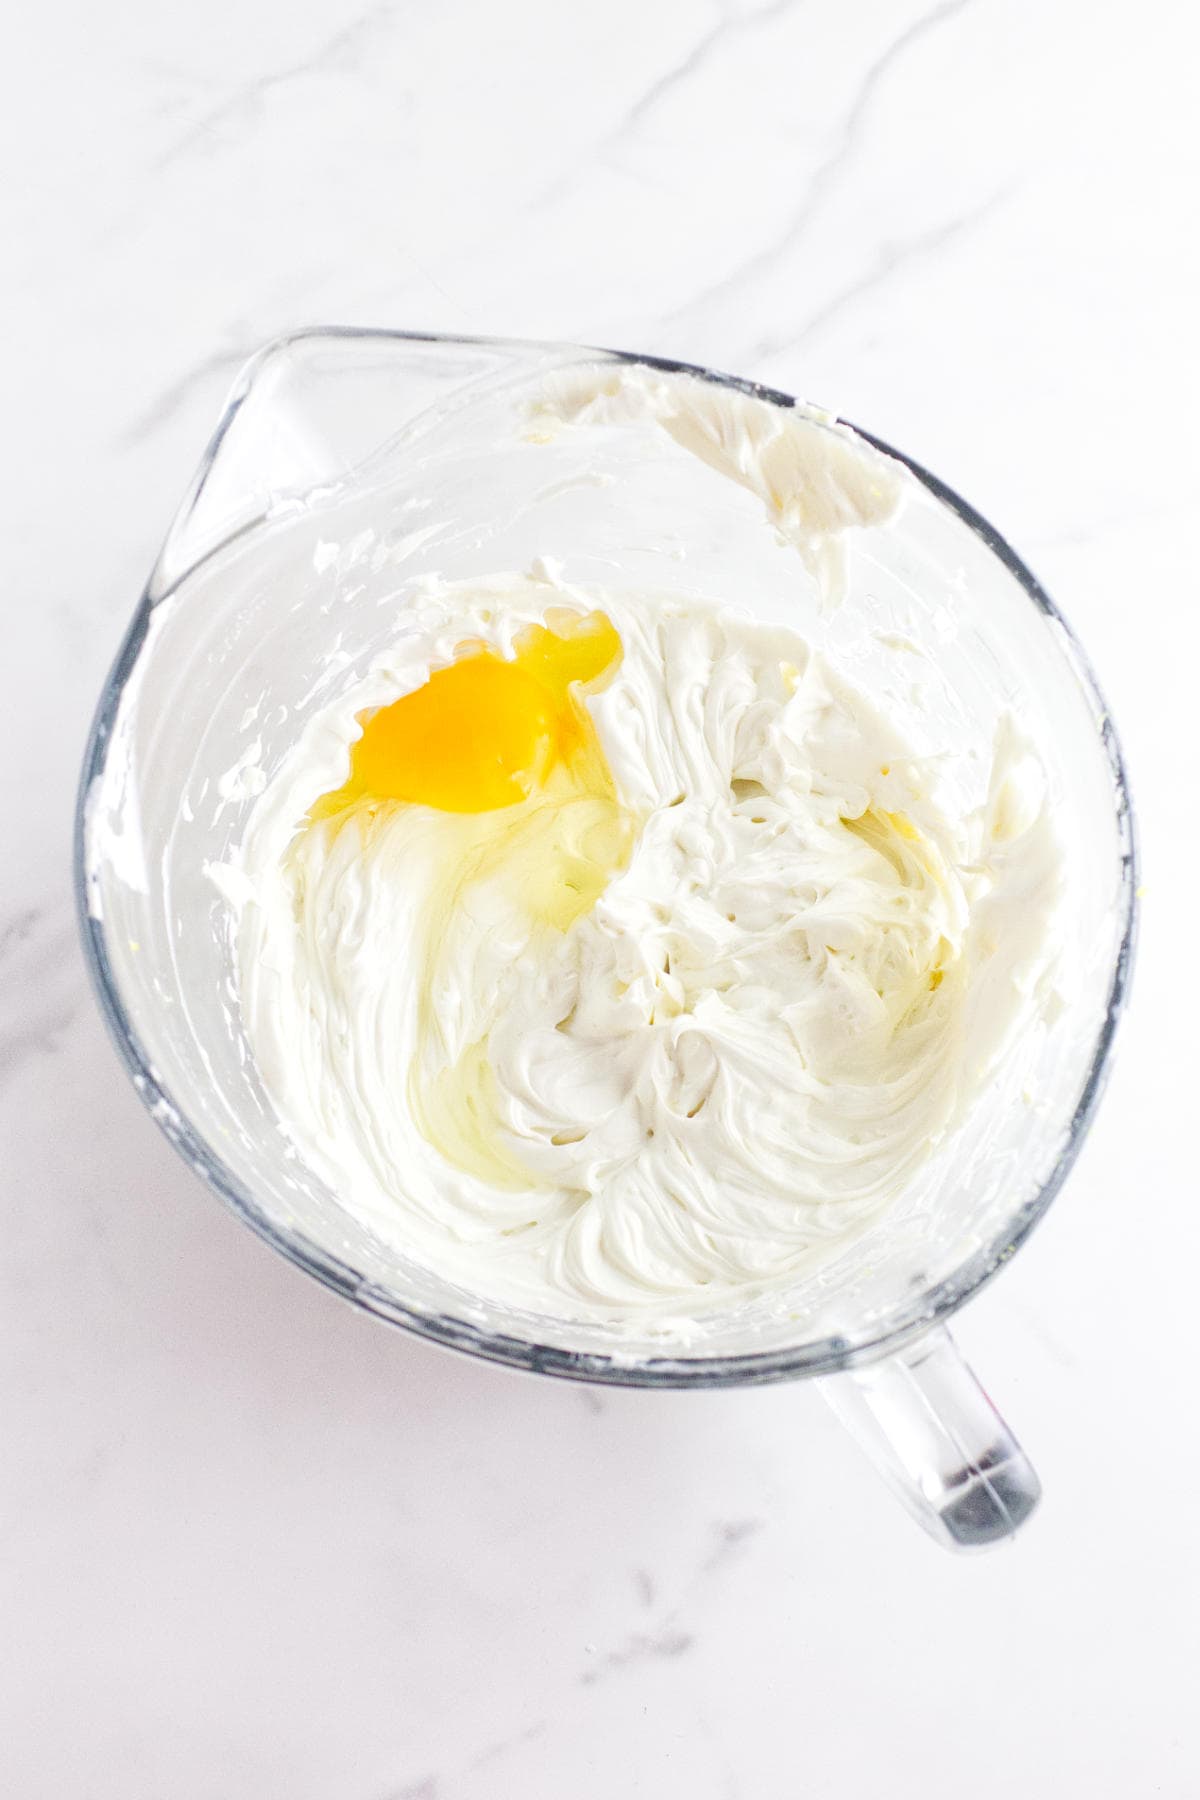 eggs added to cream cheese in a mixing bowl.